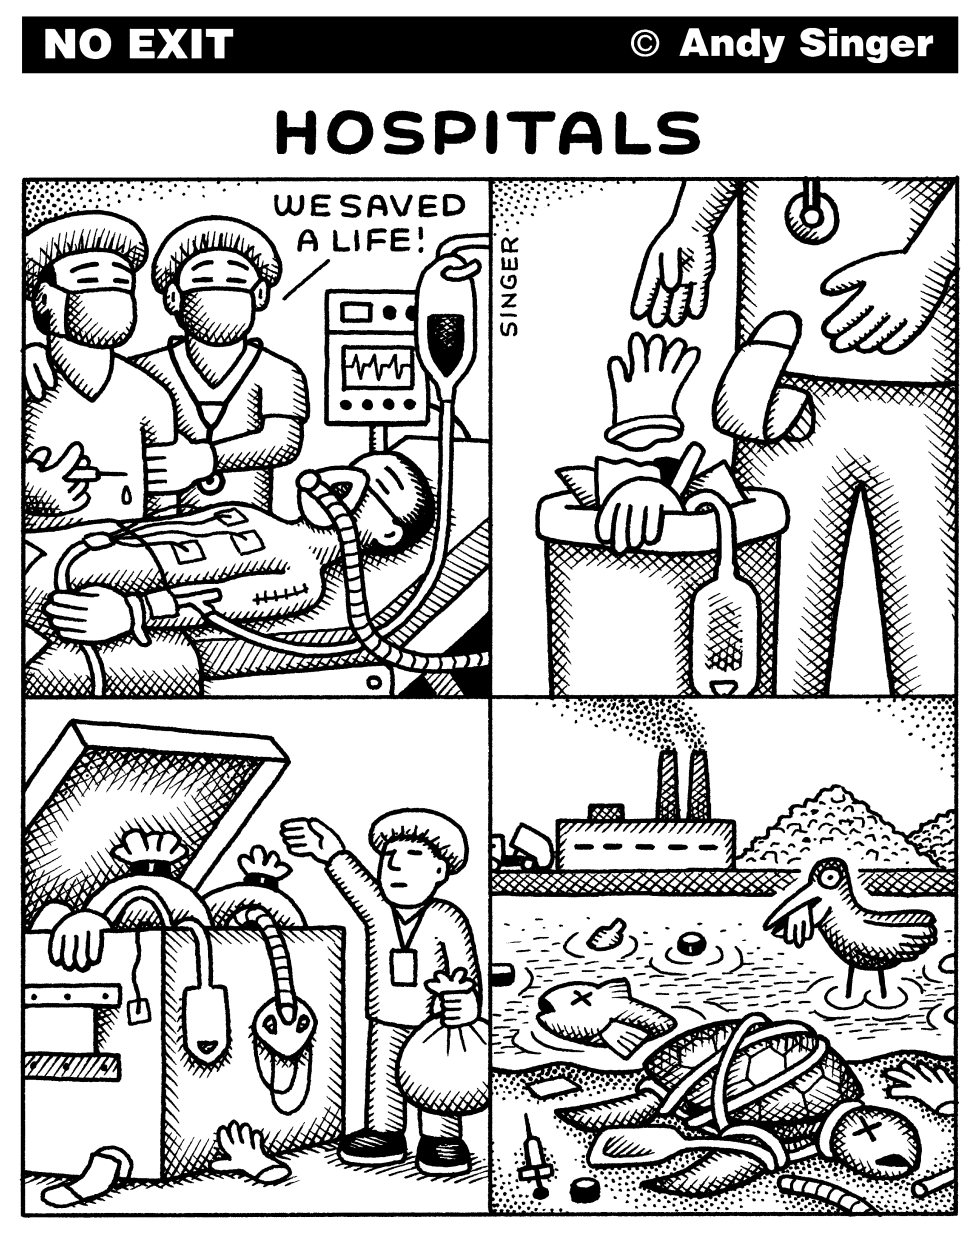 HOSPITAL WASTE by Andy Singer